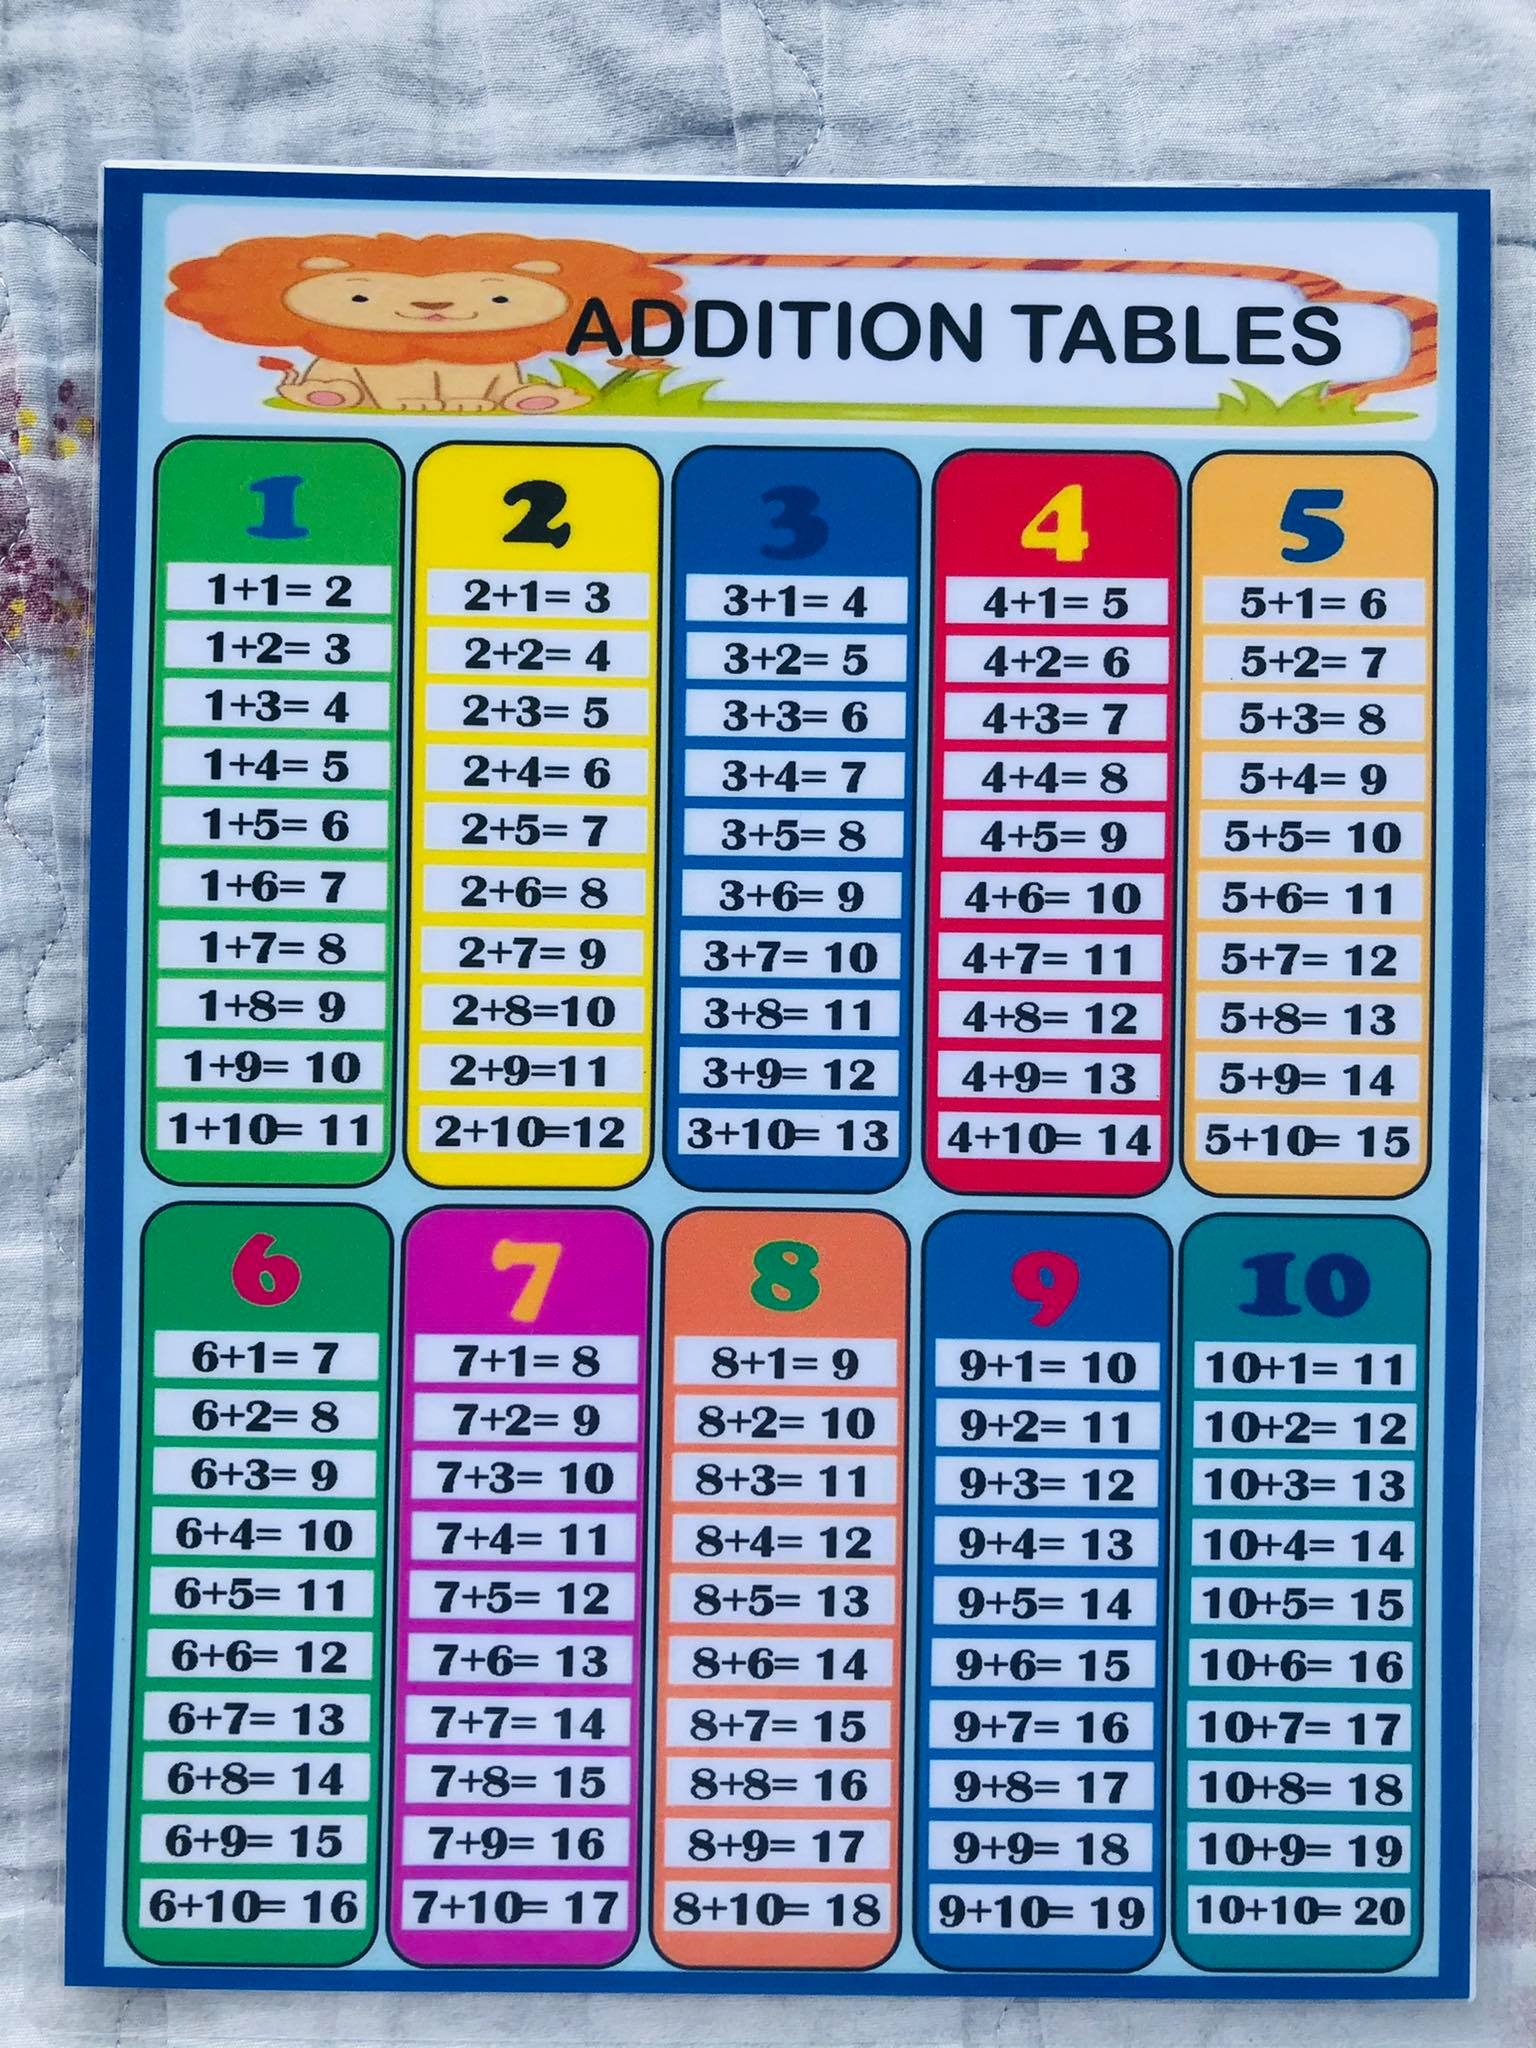 all-about-math-laminated-chart-for-kids-addition-table